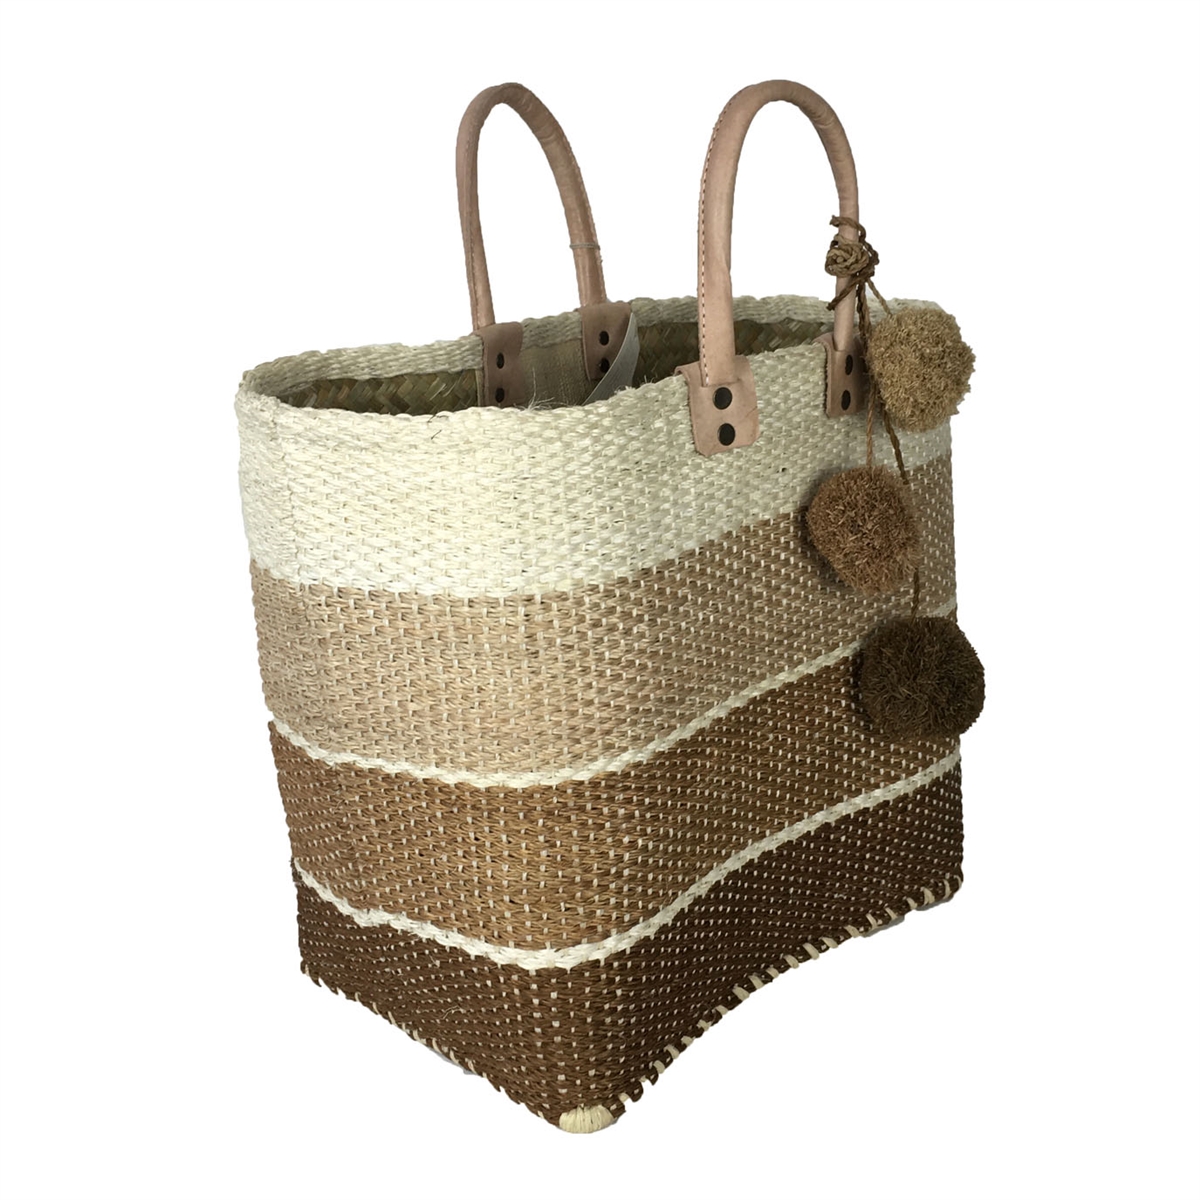 Ombre Tote Bag - Sand